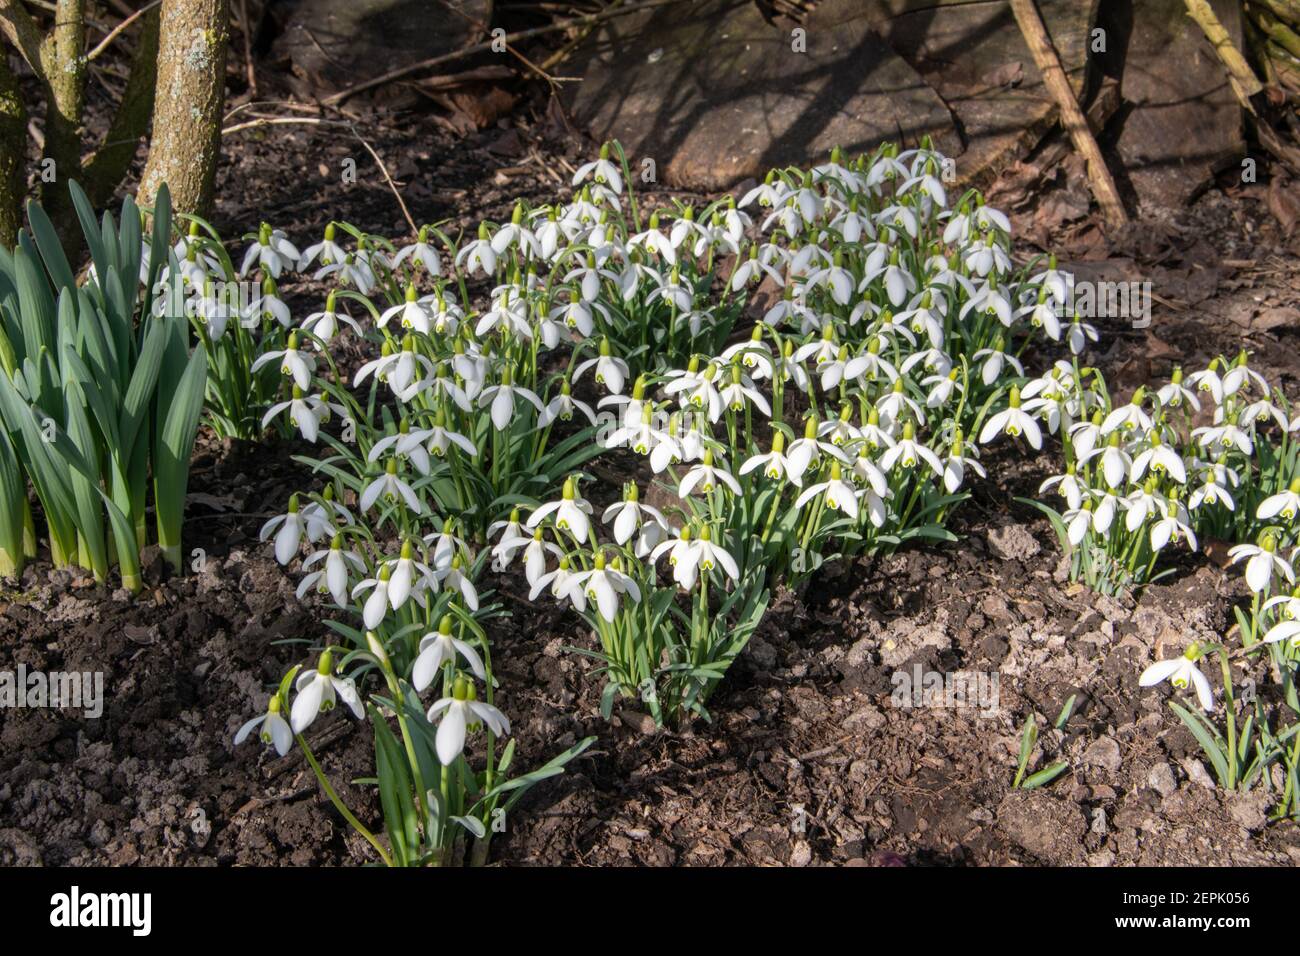 A group of snowdrops, Galanthus nivalis, bloom among shrubs in February. Stock Photo